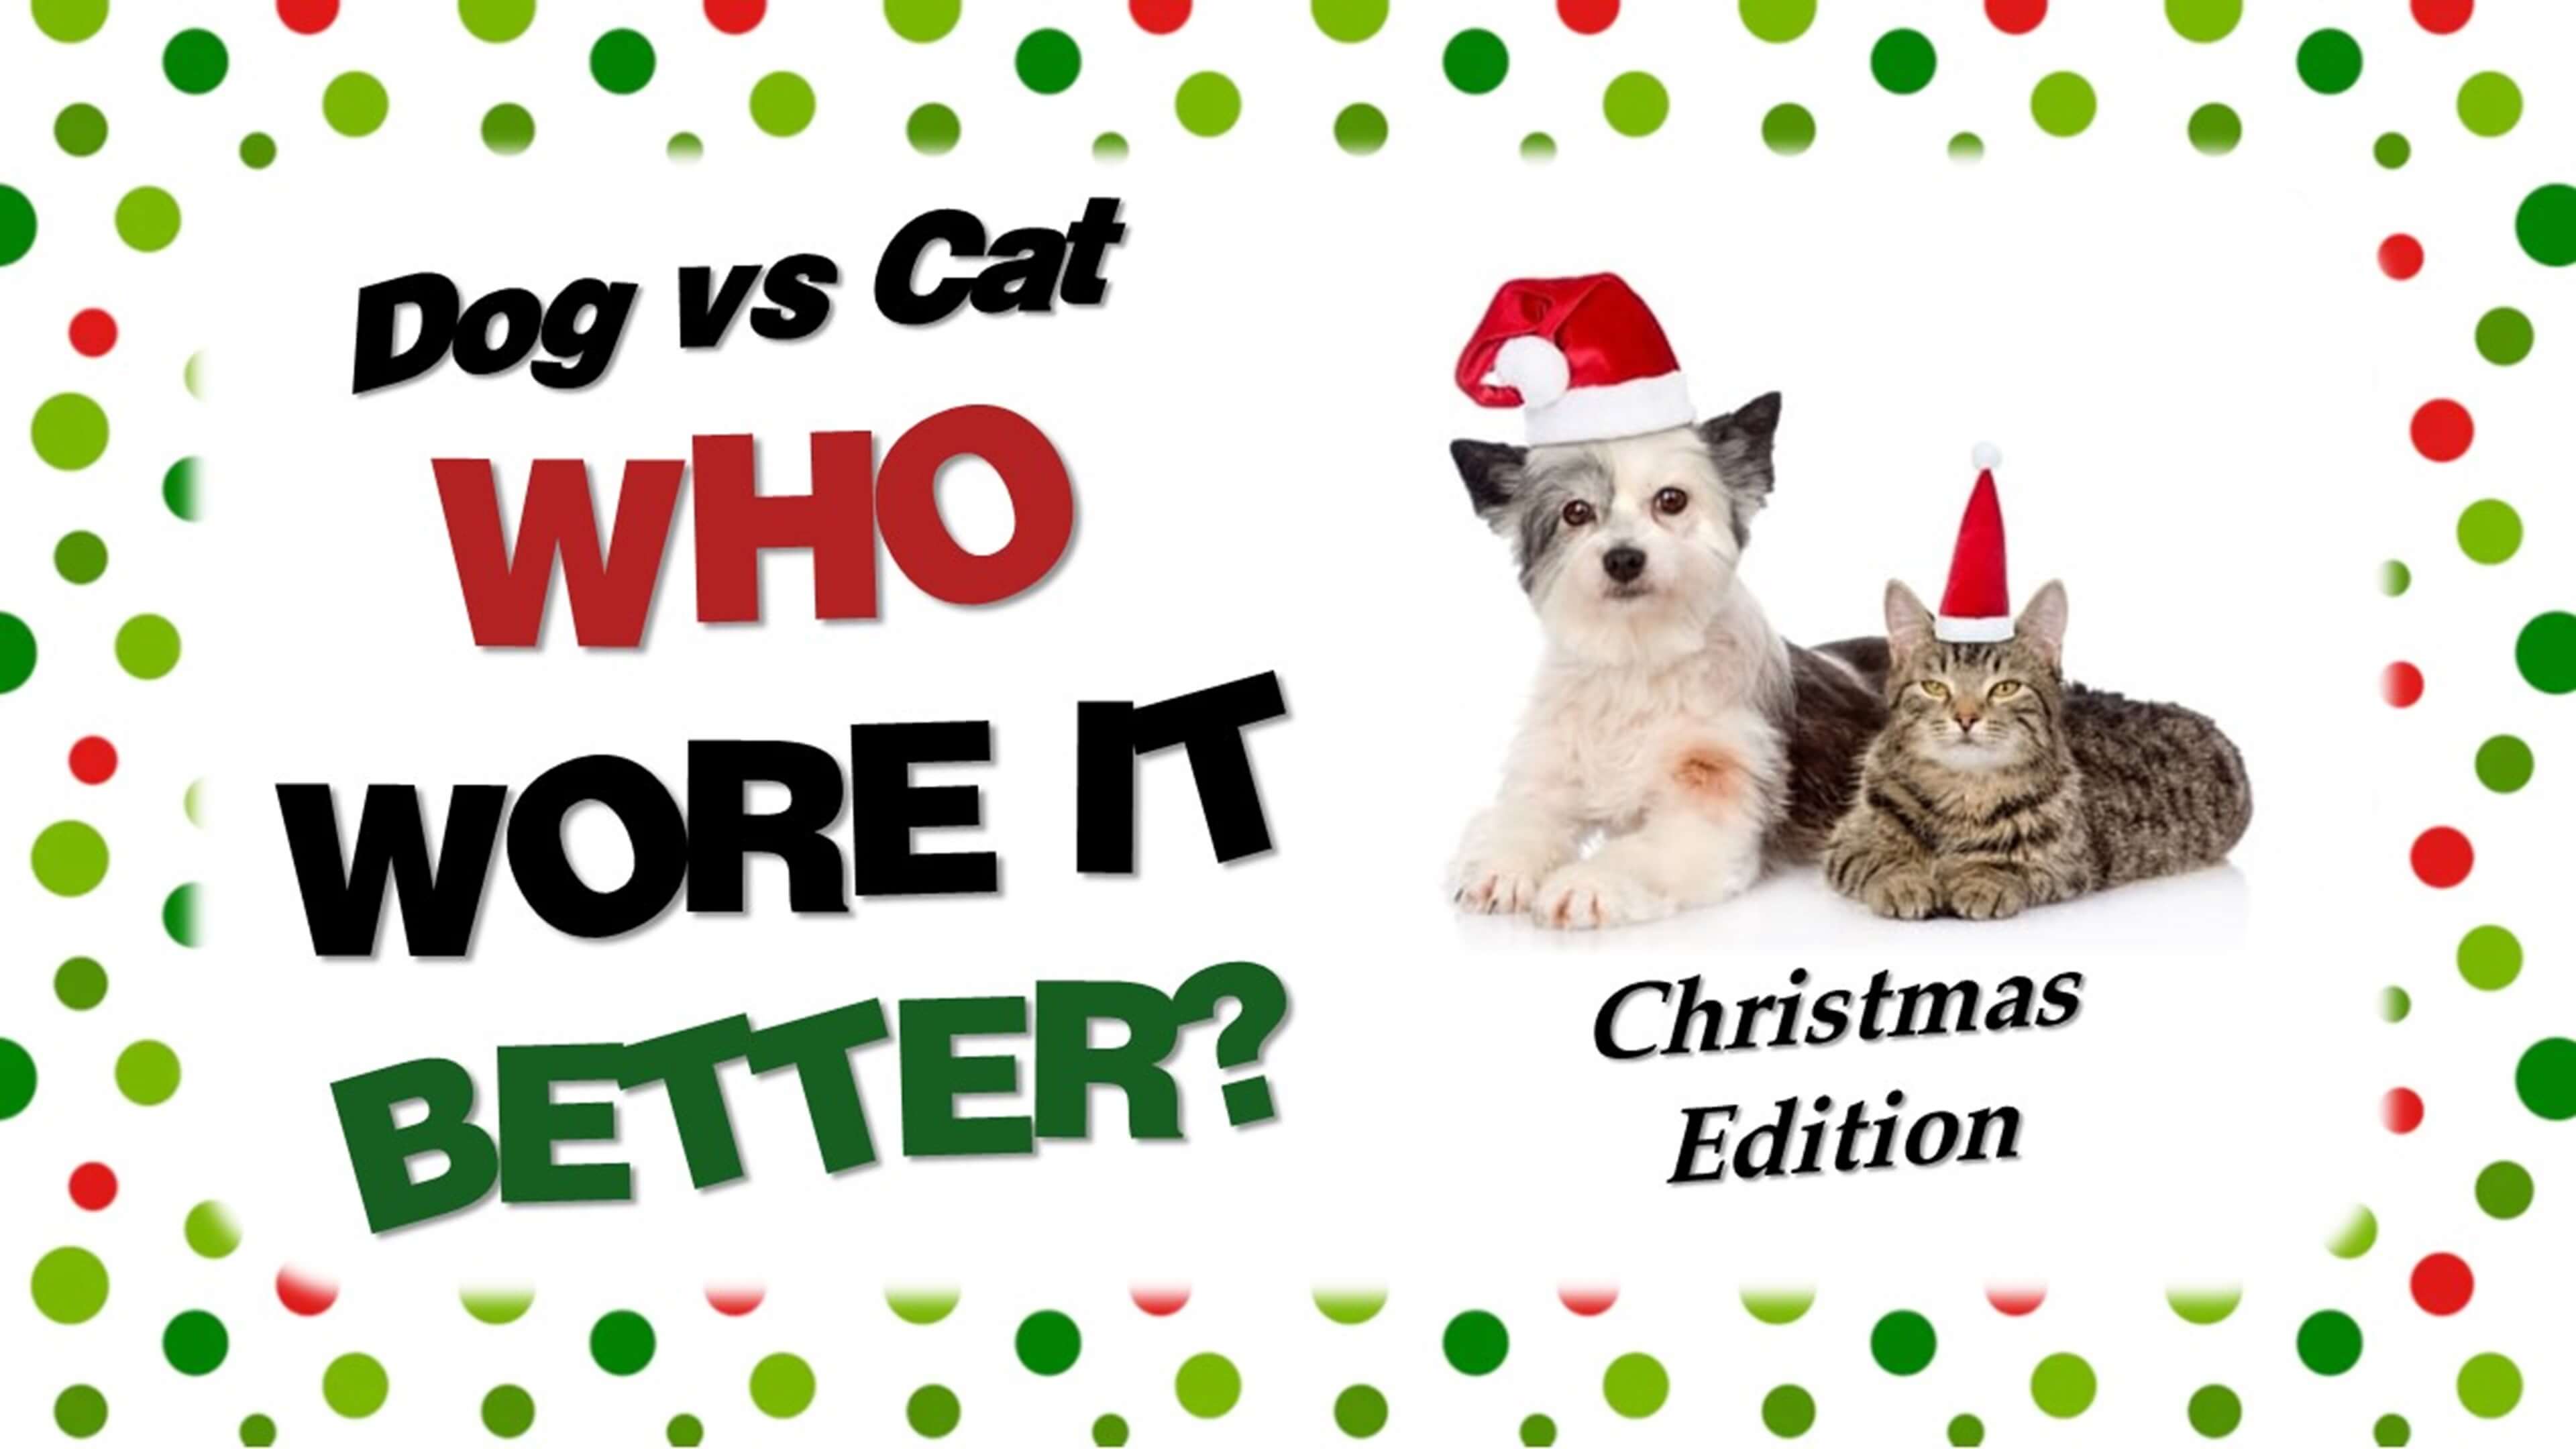 Dog vs Cat: Who Wore It Better Christmas Edition